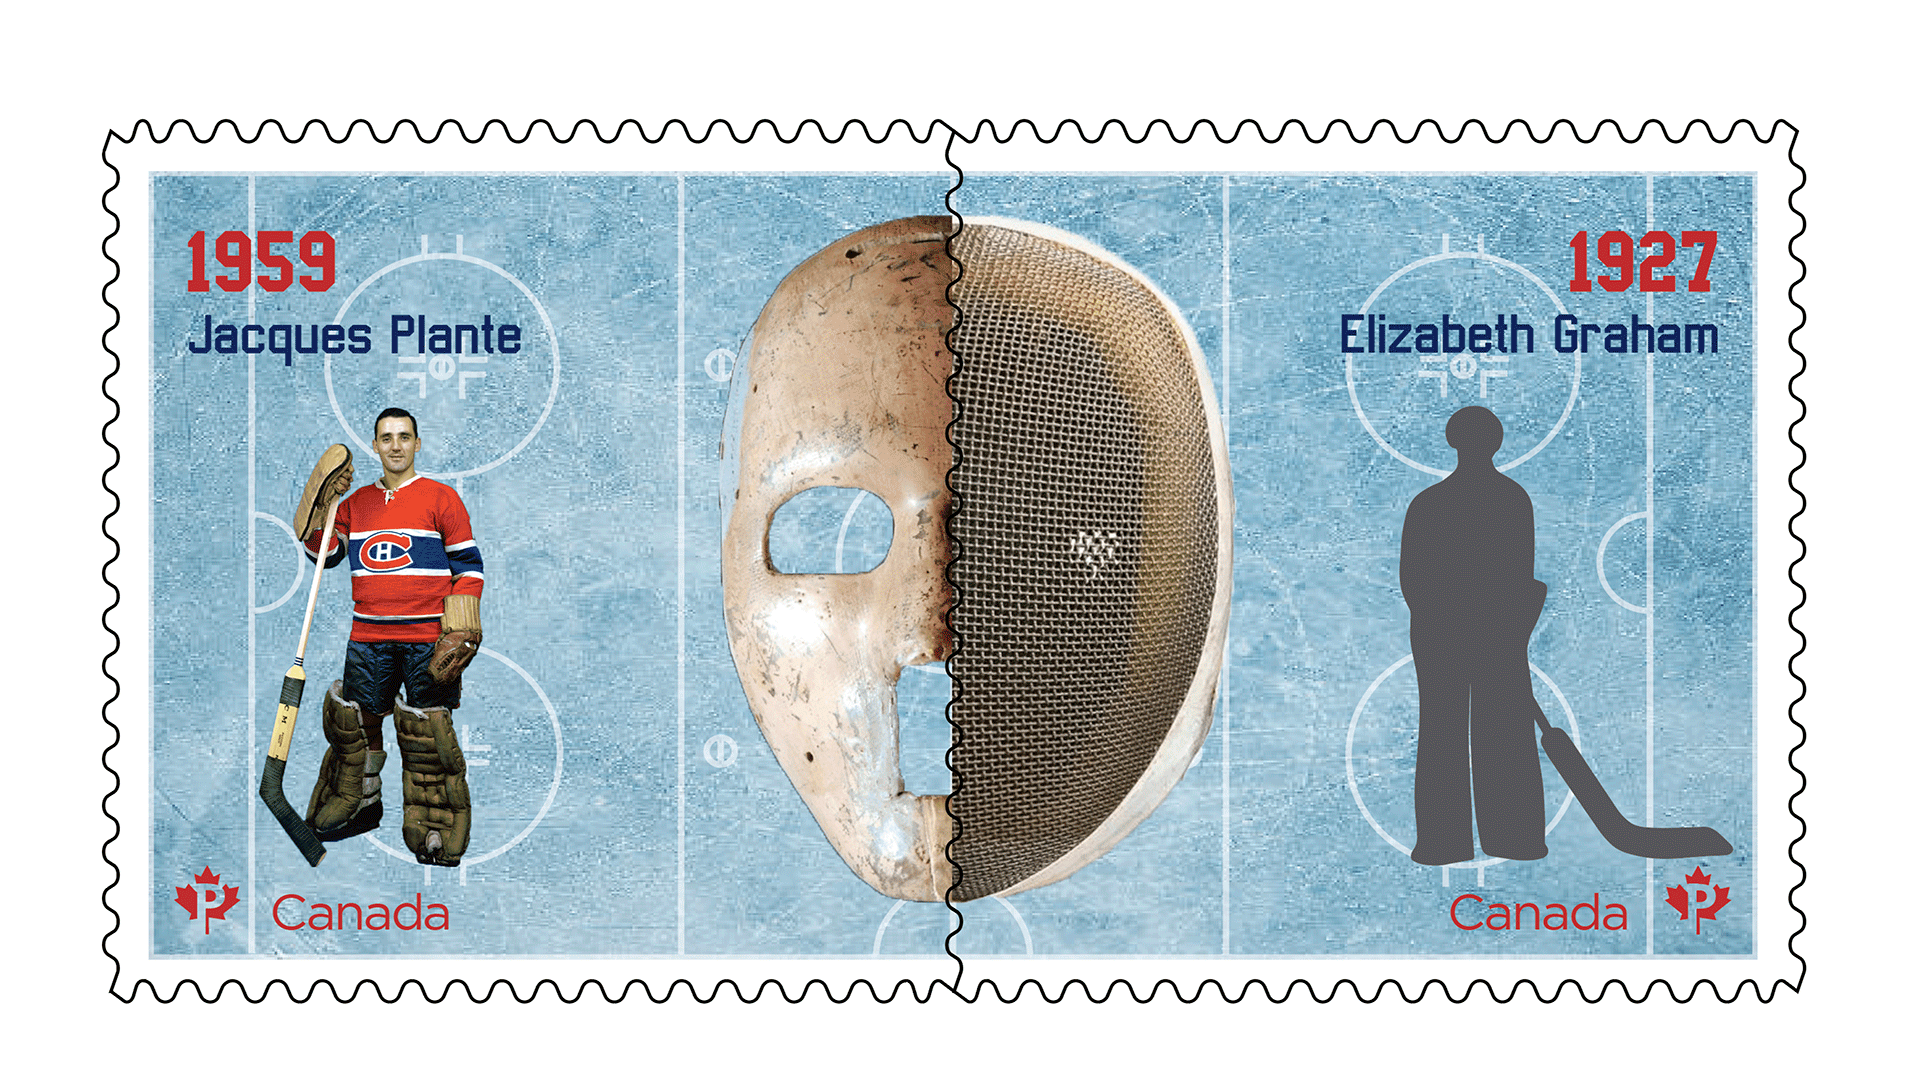 Canada Post stamps showing the inventor and first user of the hockey goalie mask.